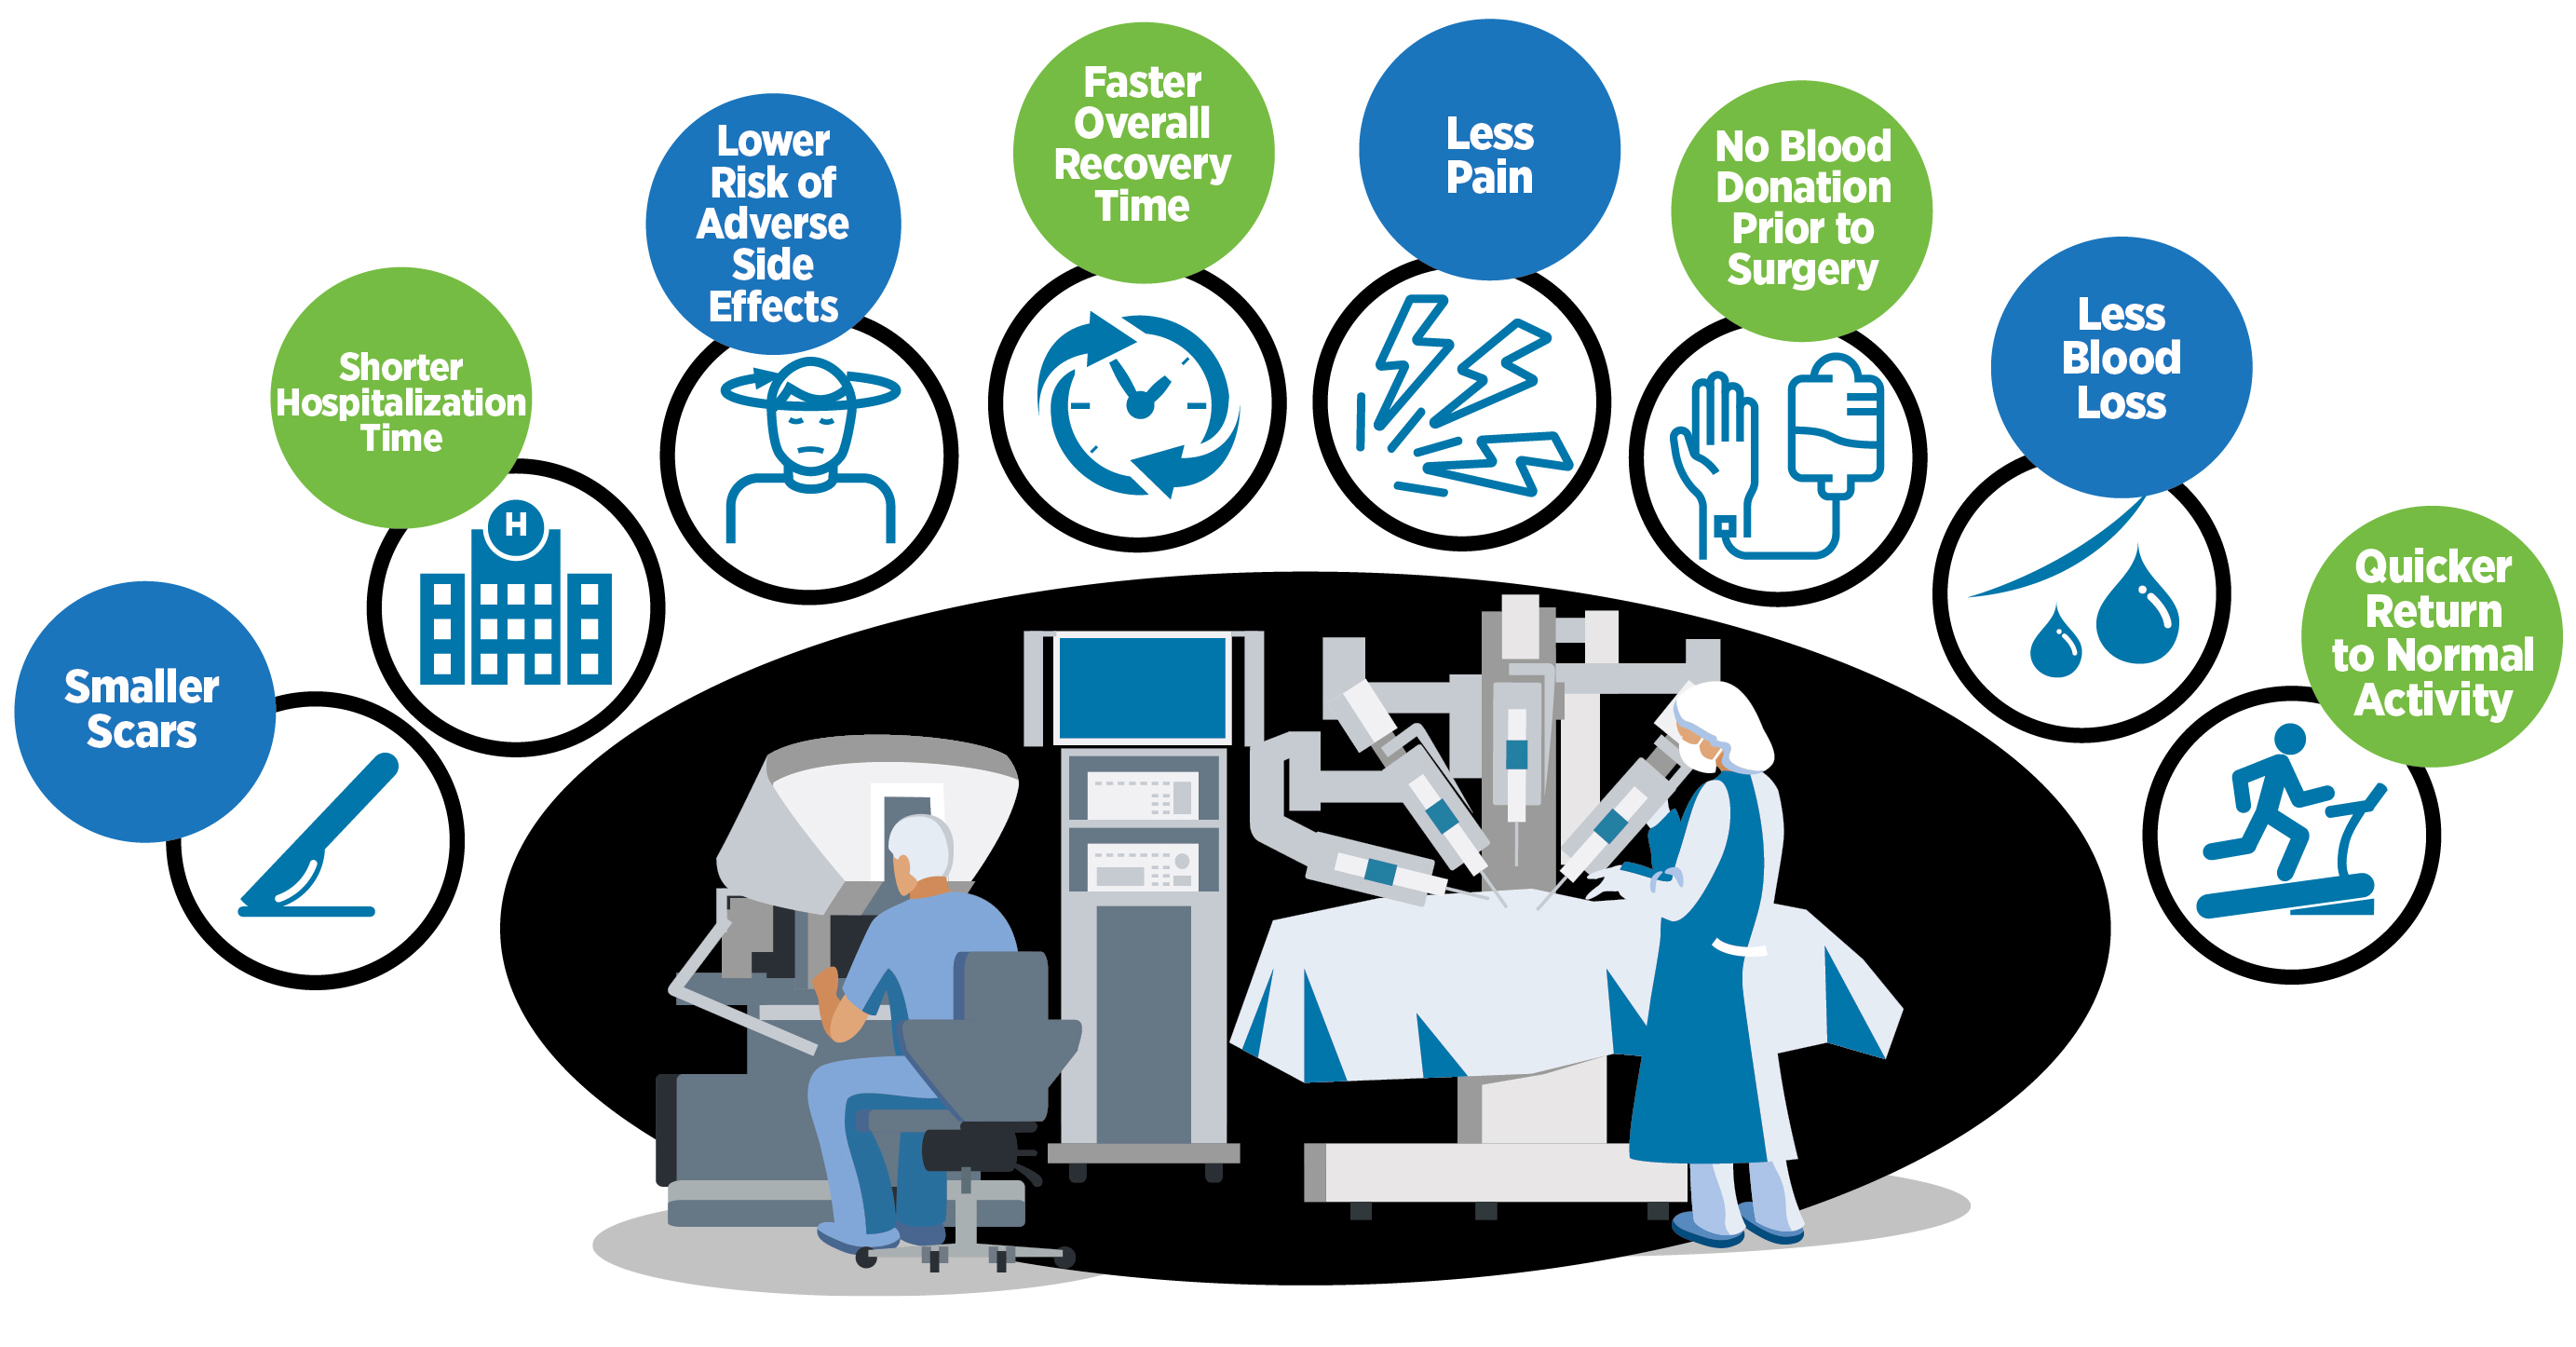 Lee Health's state-of-the-art technology: da Vinci™ Surgical System